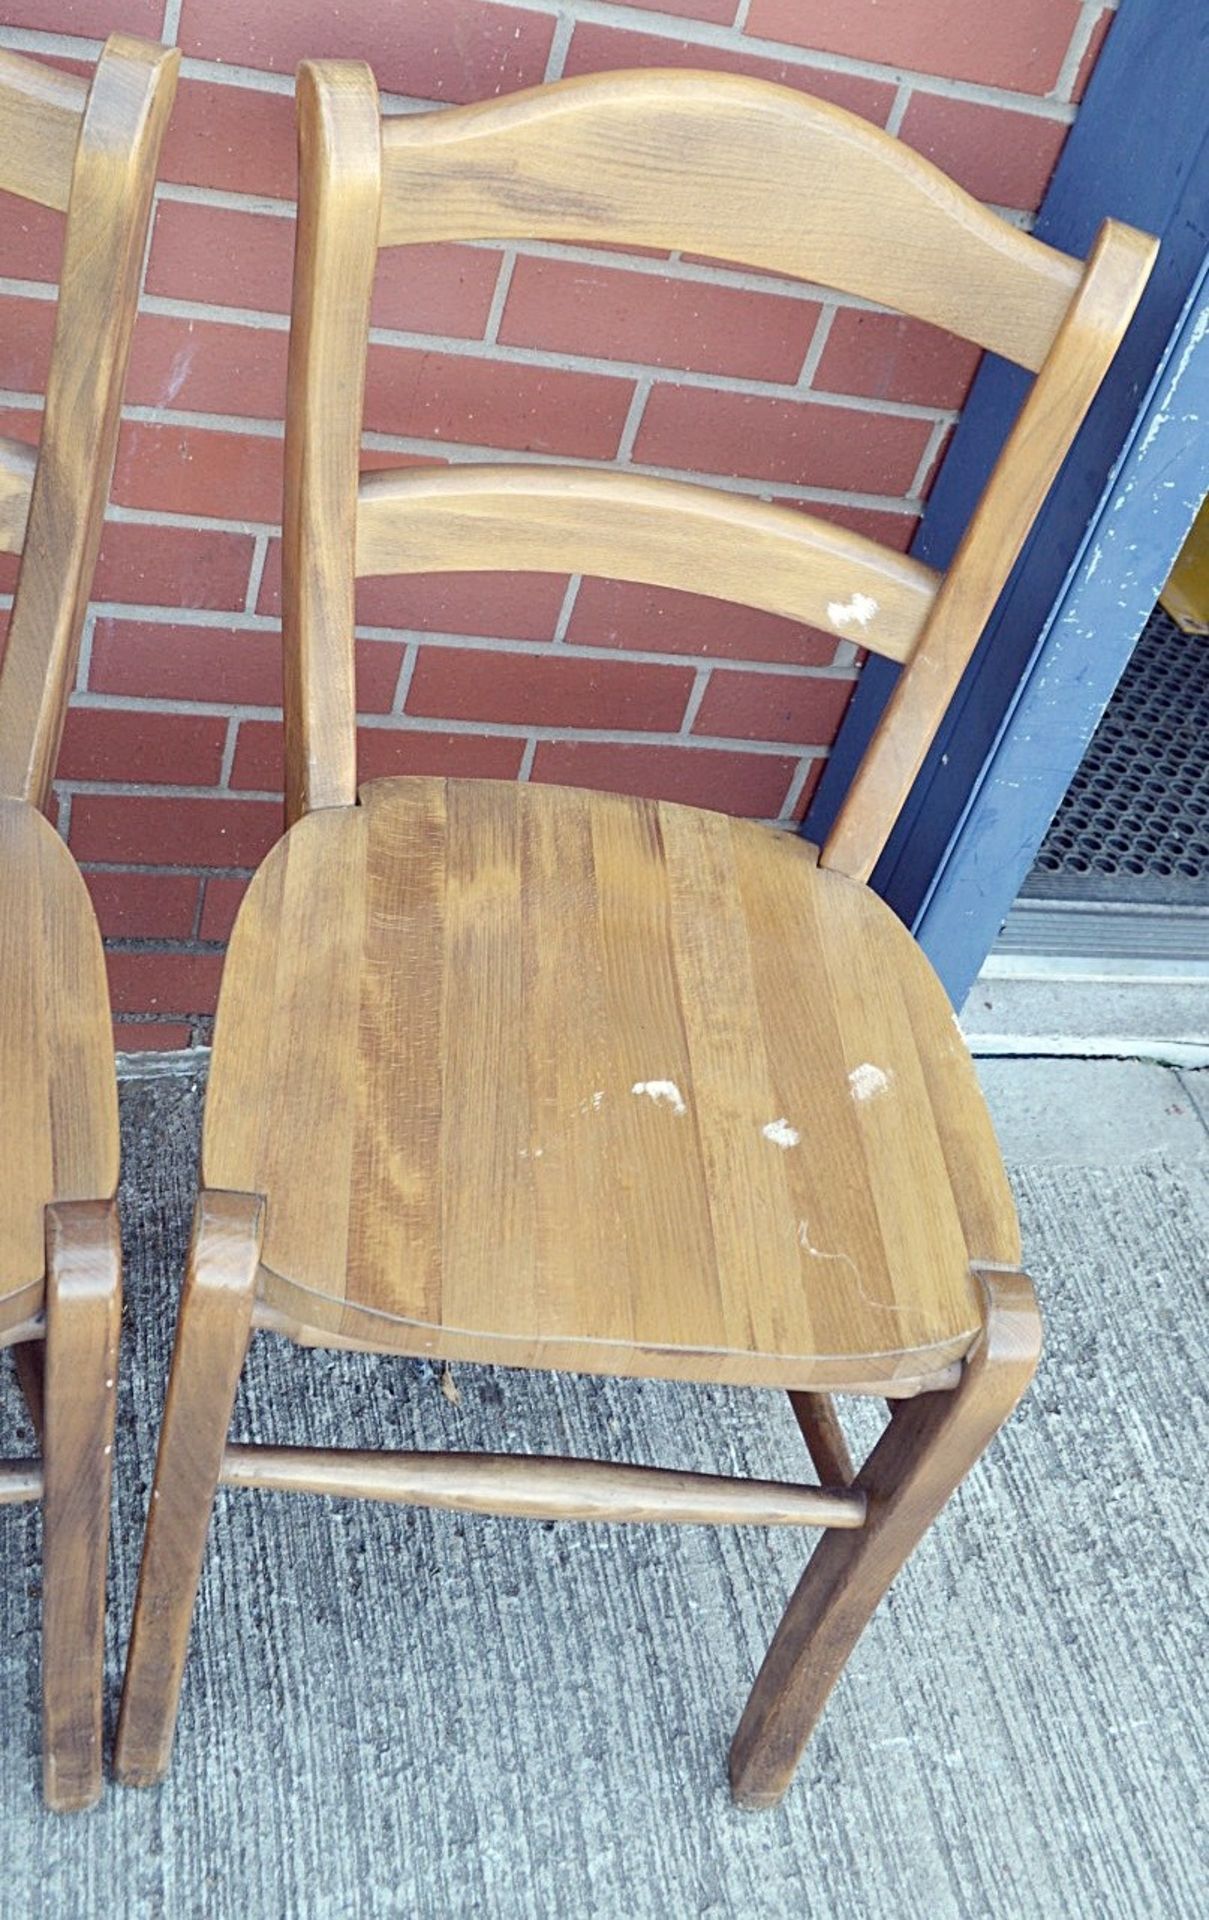 3 x Matching Sturdy Solid Wood Chairs With An Attractive Varnished Finish - Dimensions: H90 x W47 - Image 5 of 6